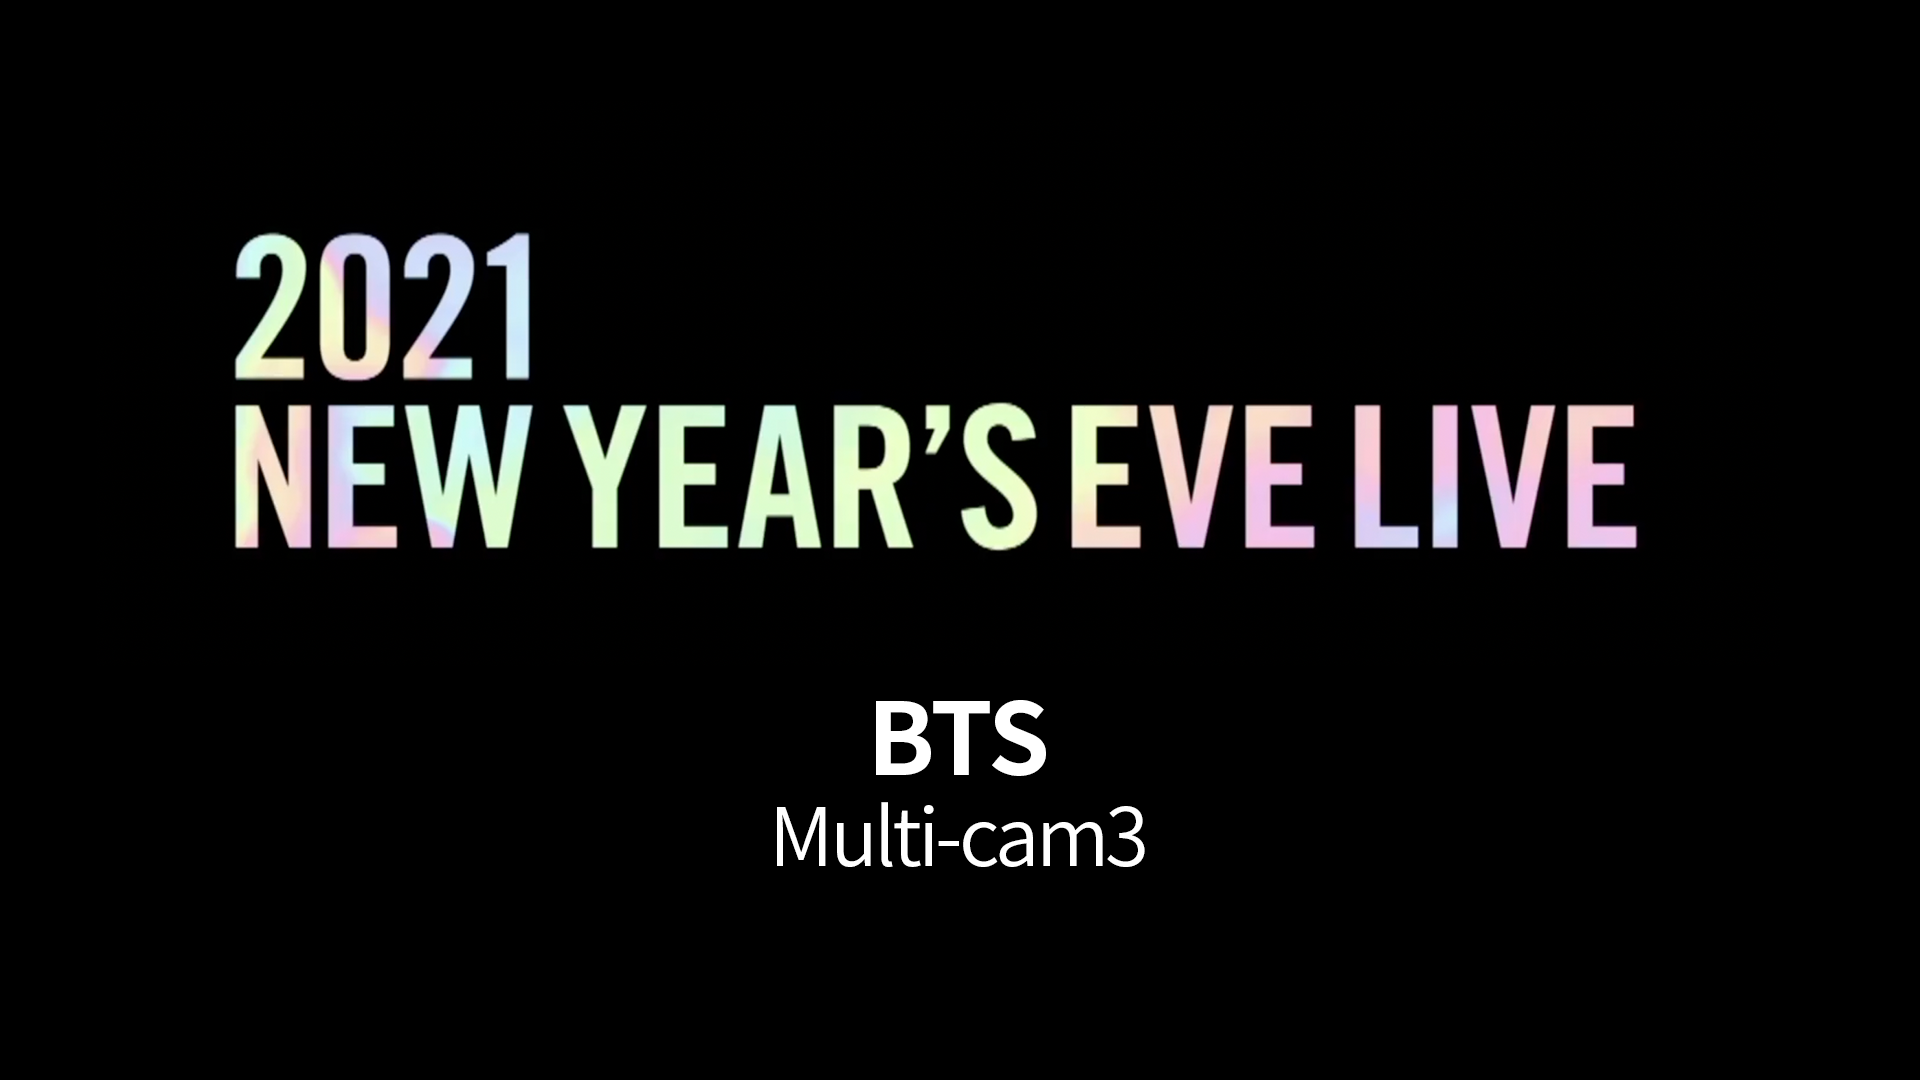 [BTS] '2021 NEW YEAR'S EVE LIVE' MULTI CAM 3